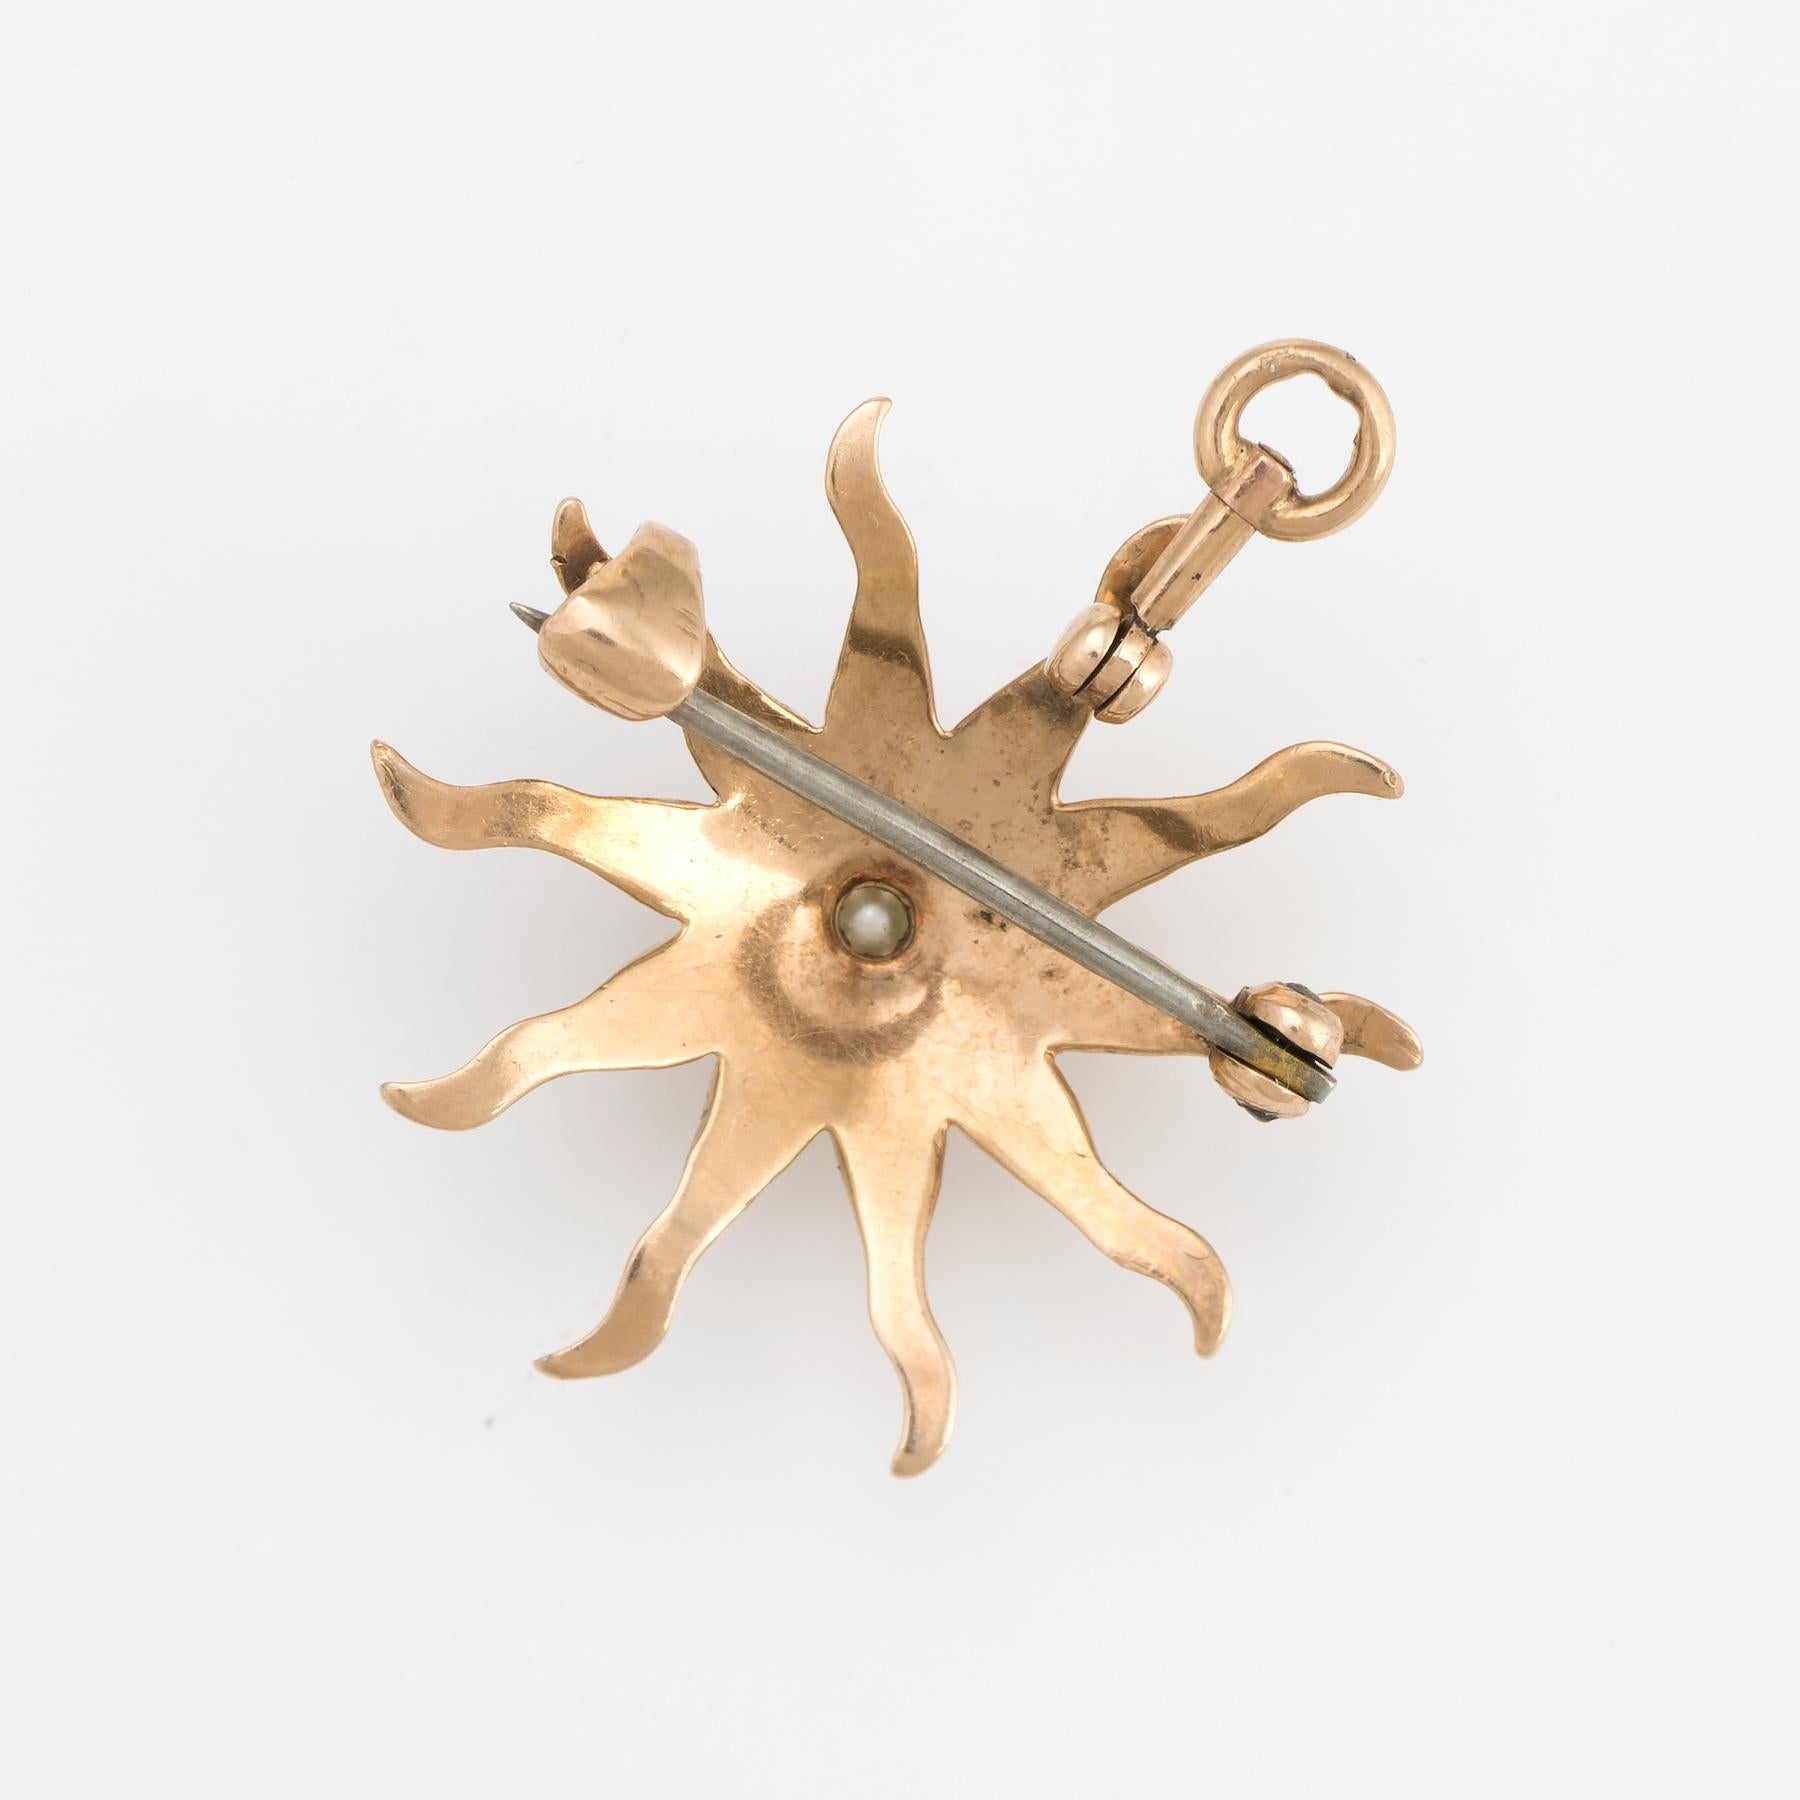 Finely detailed antique Victorian sunburst pendant or brooch (circa 1880s to 1900s), crafted in 10 karat rose gold. 

A total of 31 seed pearls ranging in size from 0/2 to 1.5mm adorn the pendant.

The piece is perfect for everyday wear and